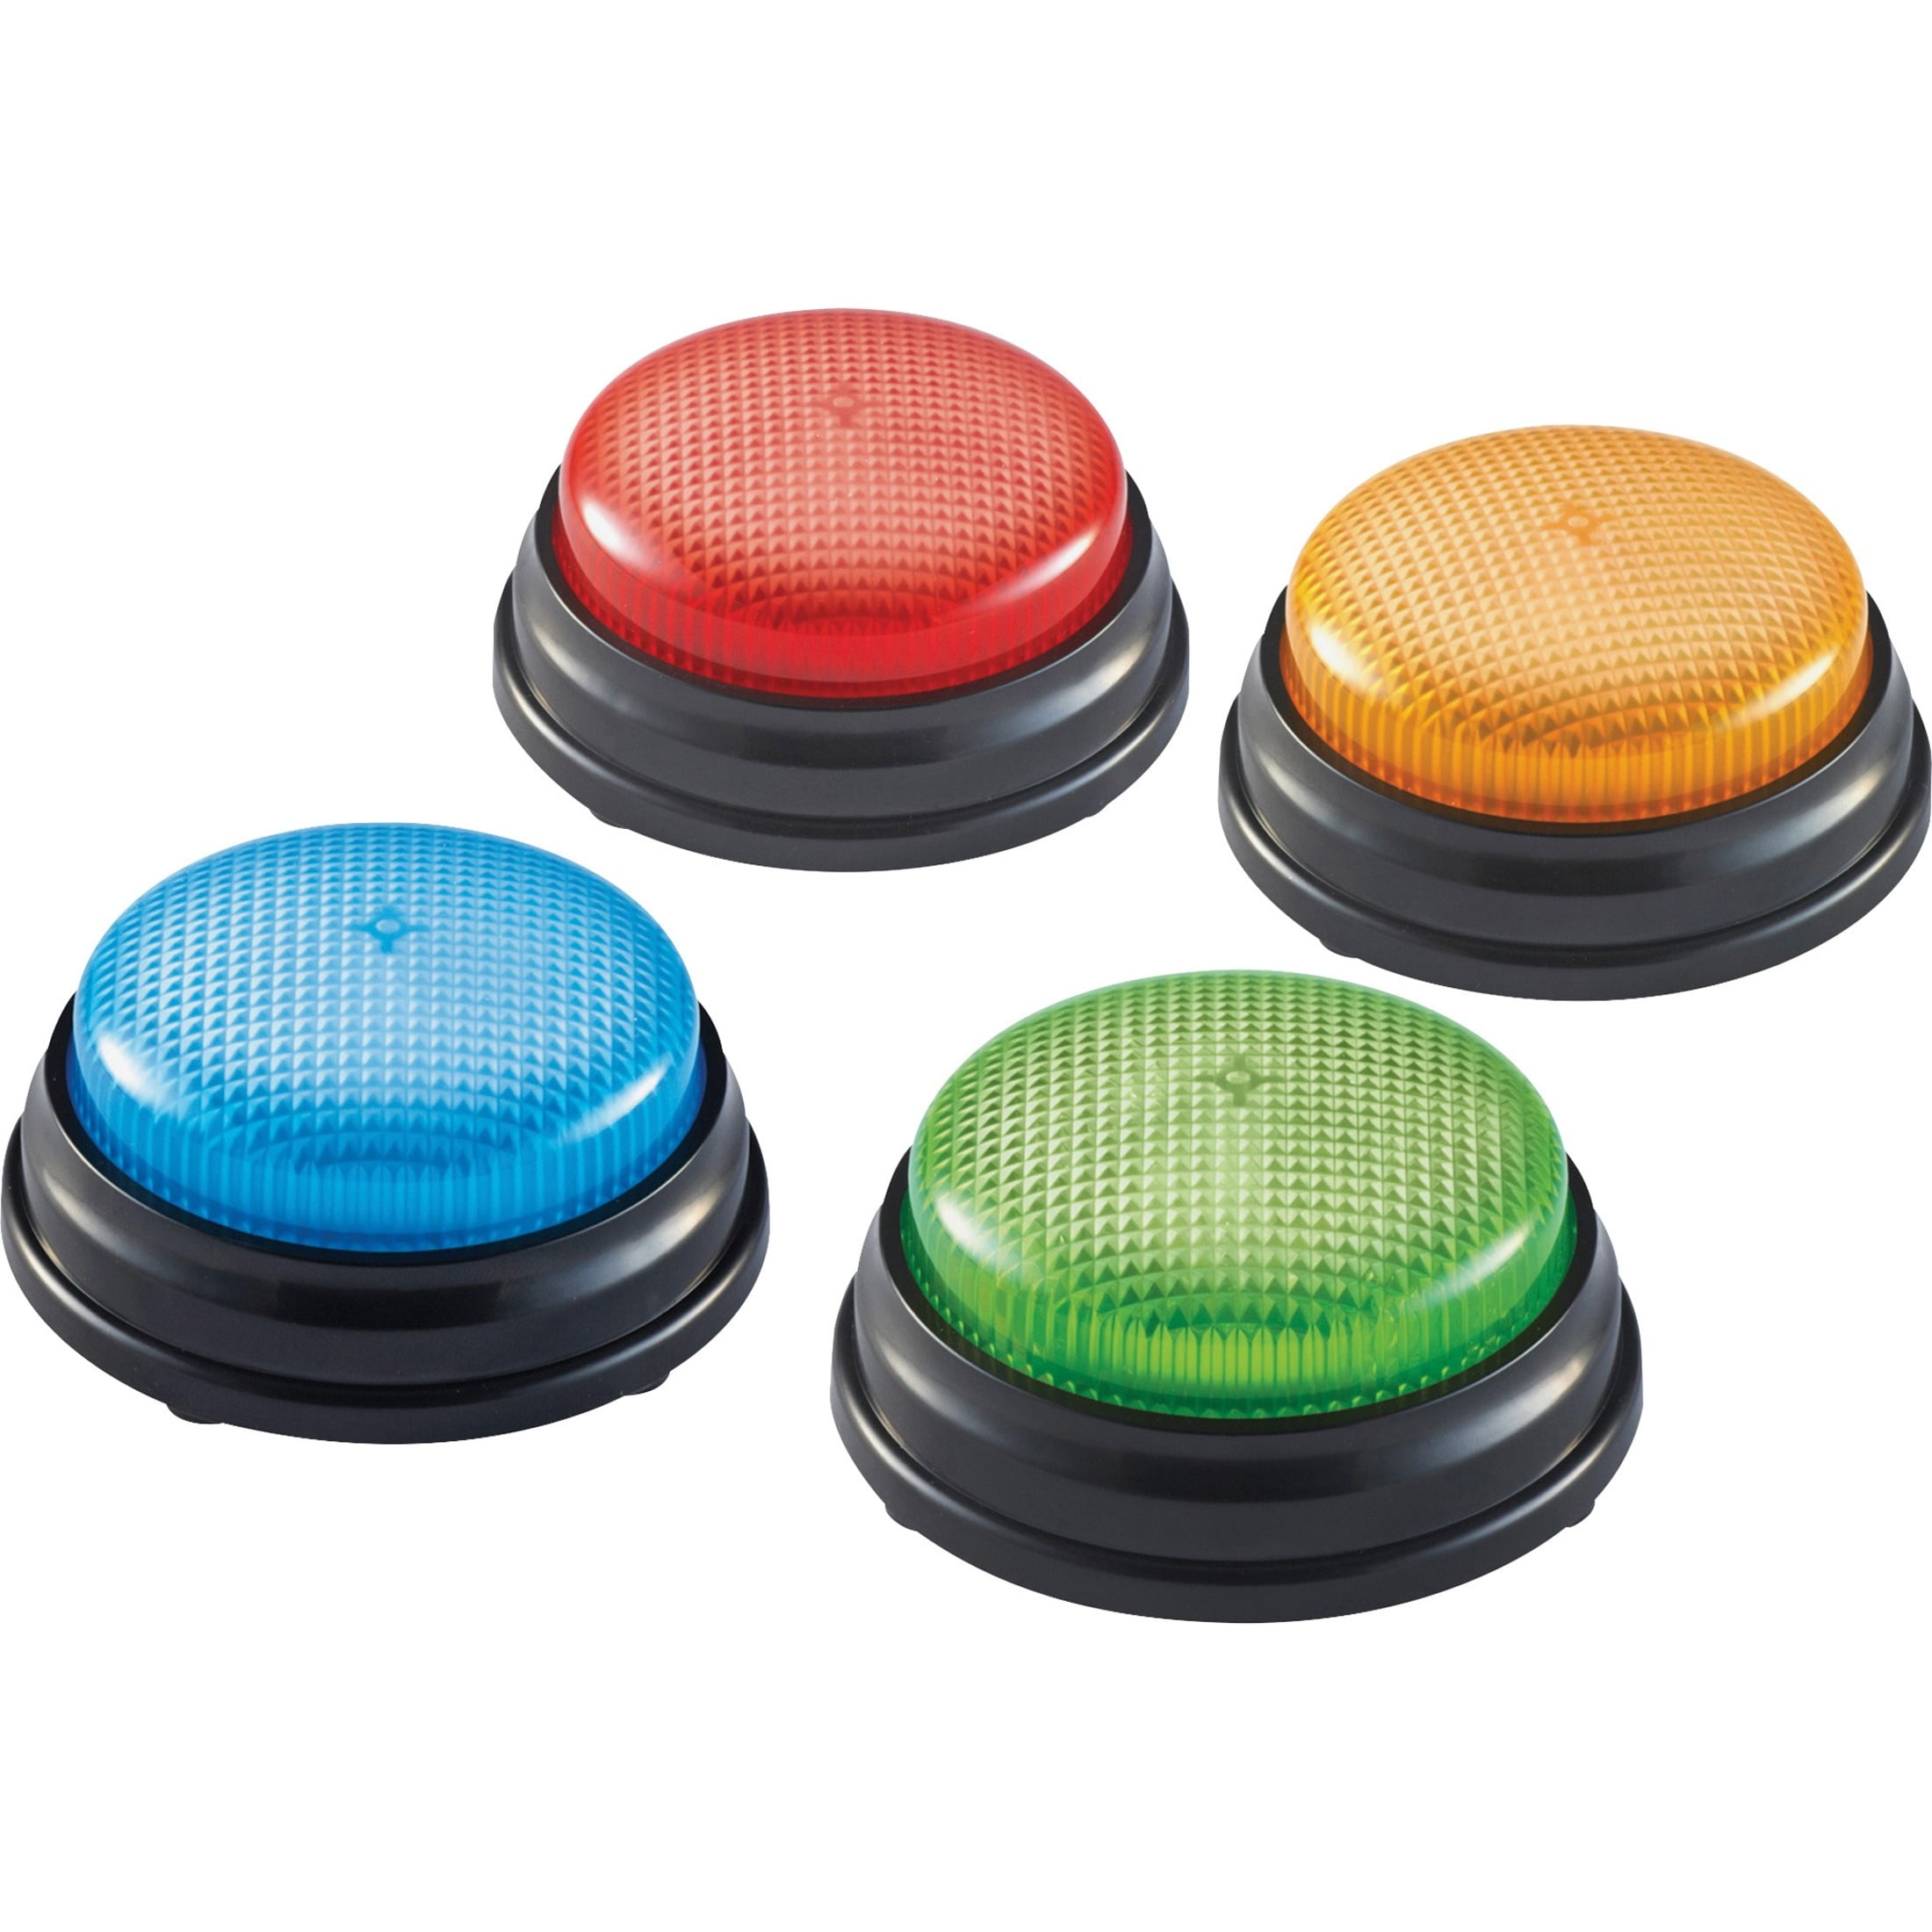 Details about   Recordable Answer Buzzers Sound Personalized Learning Talking Button Set Of 4 